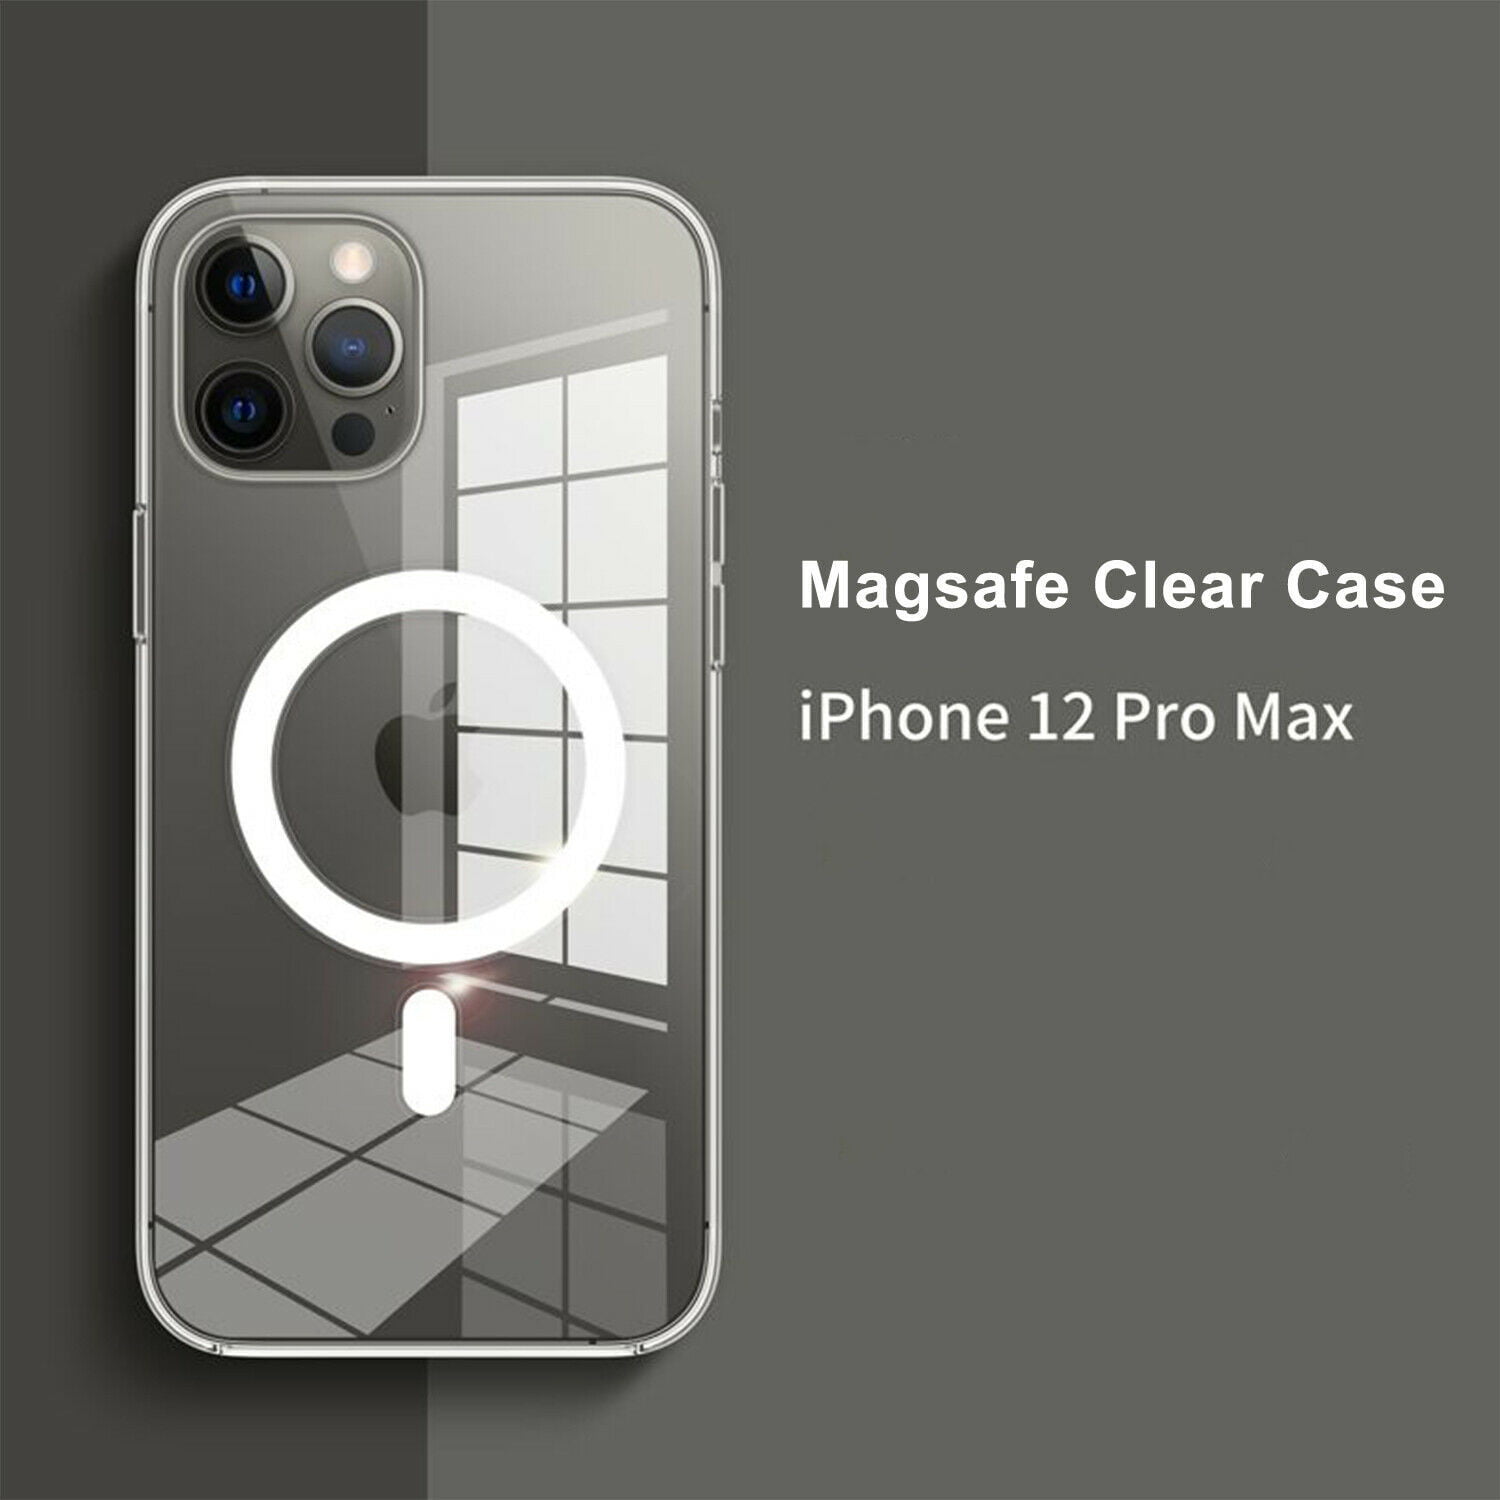 Apple Iphone 12 Pro Max Magsafe Clear Case Transparent Tpu Hard Pc Protective Magnetic Cover Compatible With Magsafe Charger For Iphone 12 Pro Max Walmart Com Walmart Com